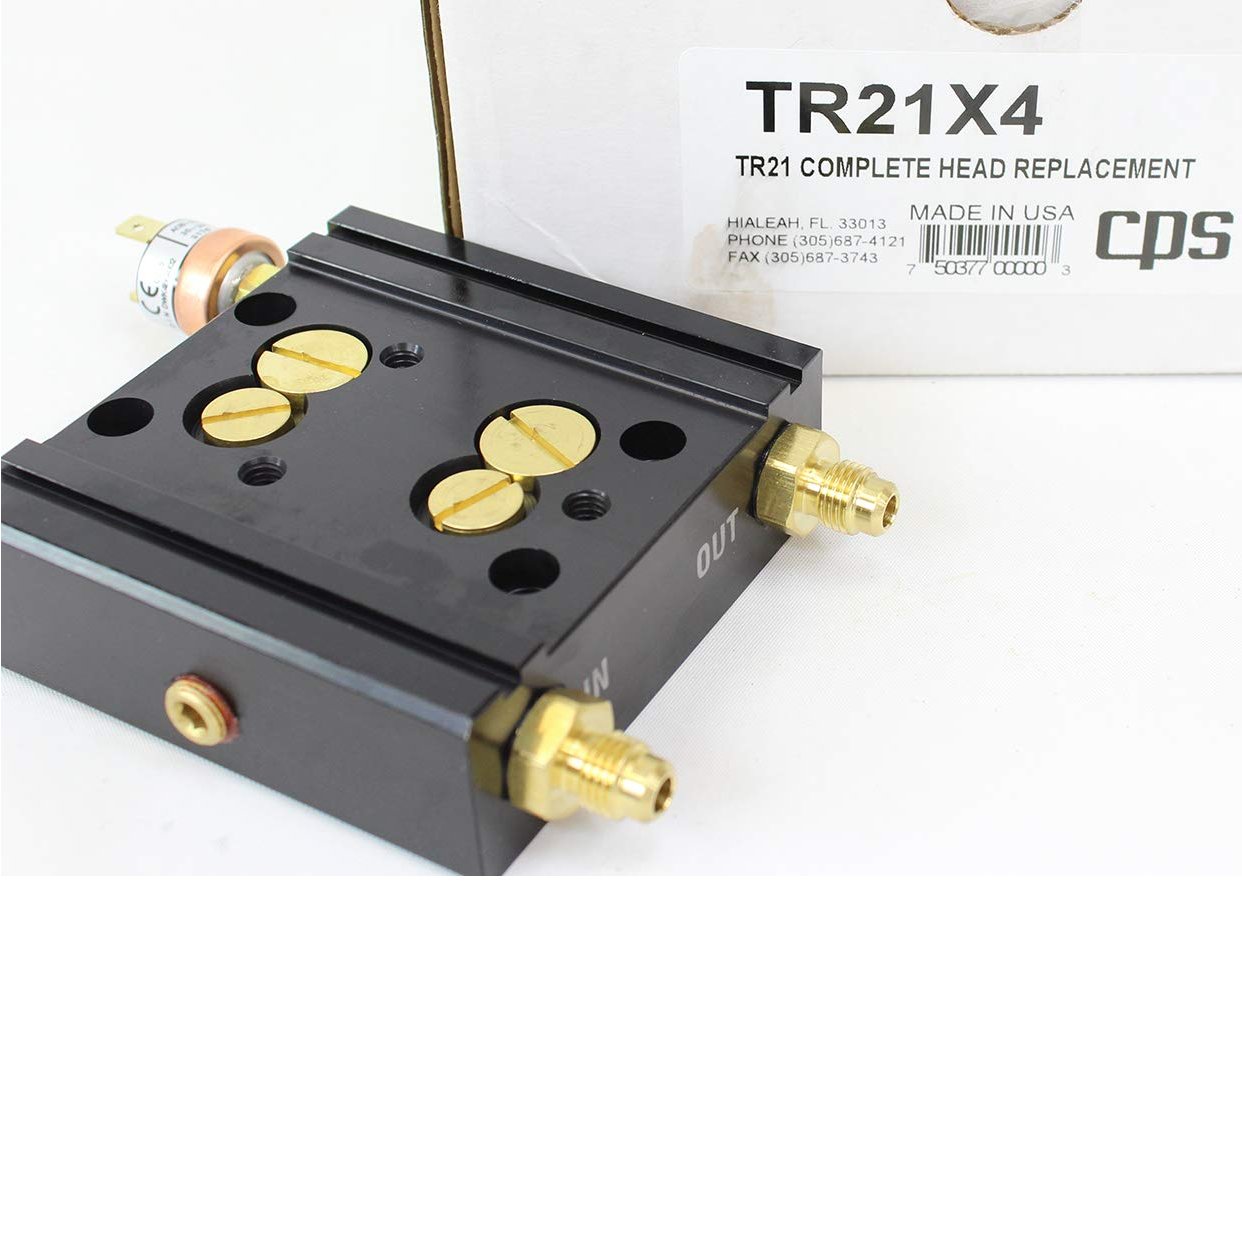 CPS TR21X4 Head Replacement Assembly